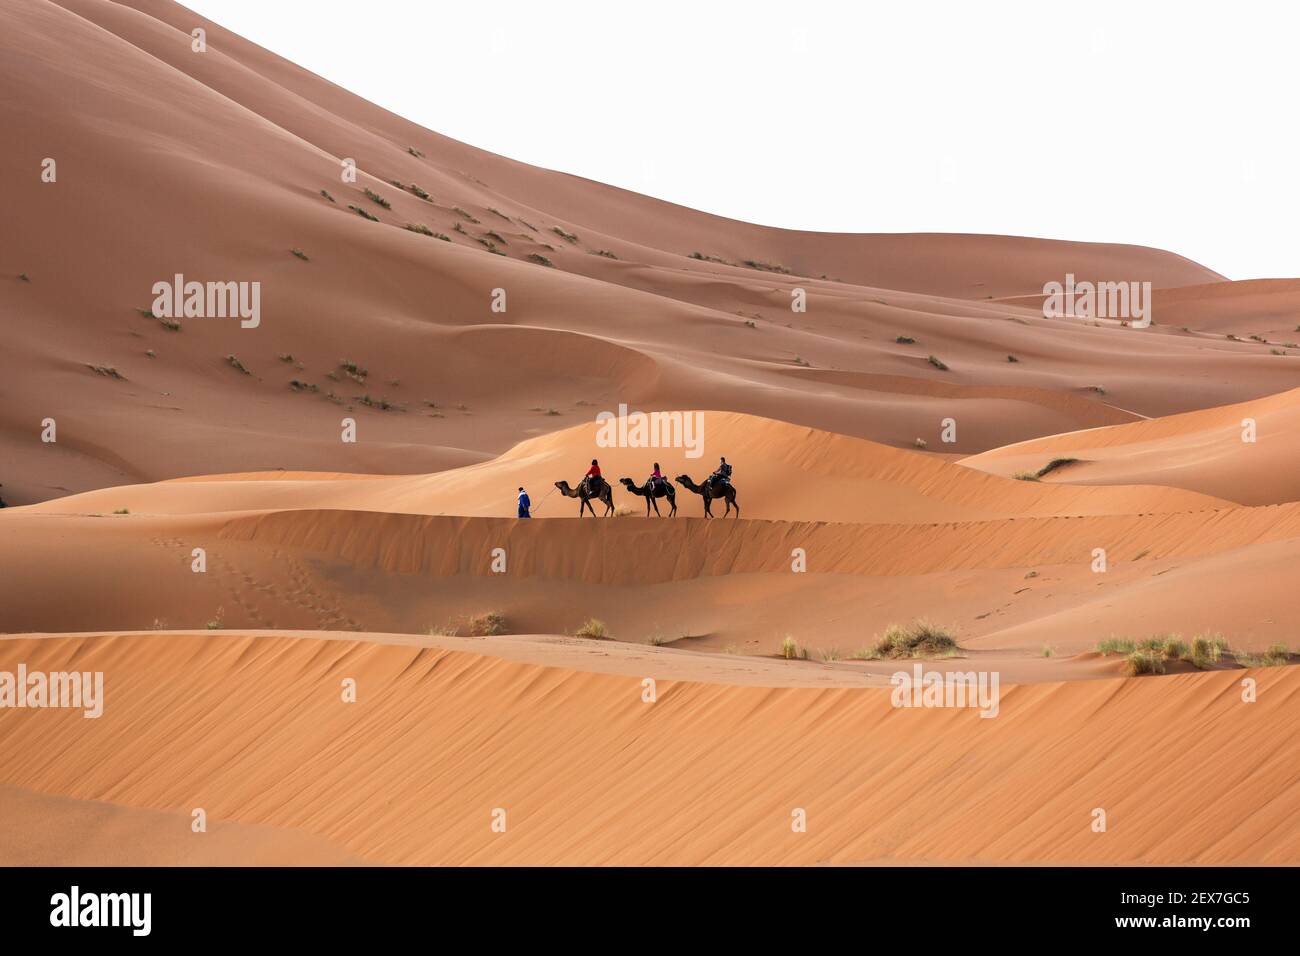 Morocco, Erg Chebbi, sand dunes near Merzouga, people crossing the dunes on camel. The dunes can reach heights of 250 meters Stock Photo